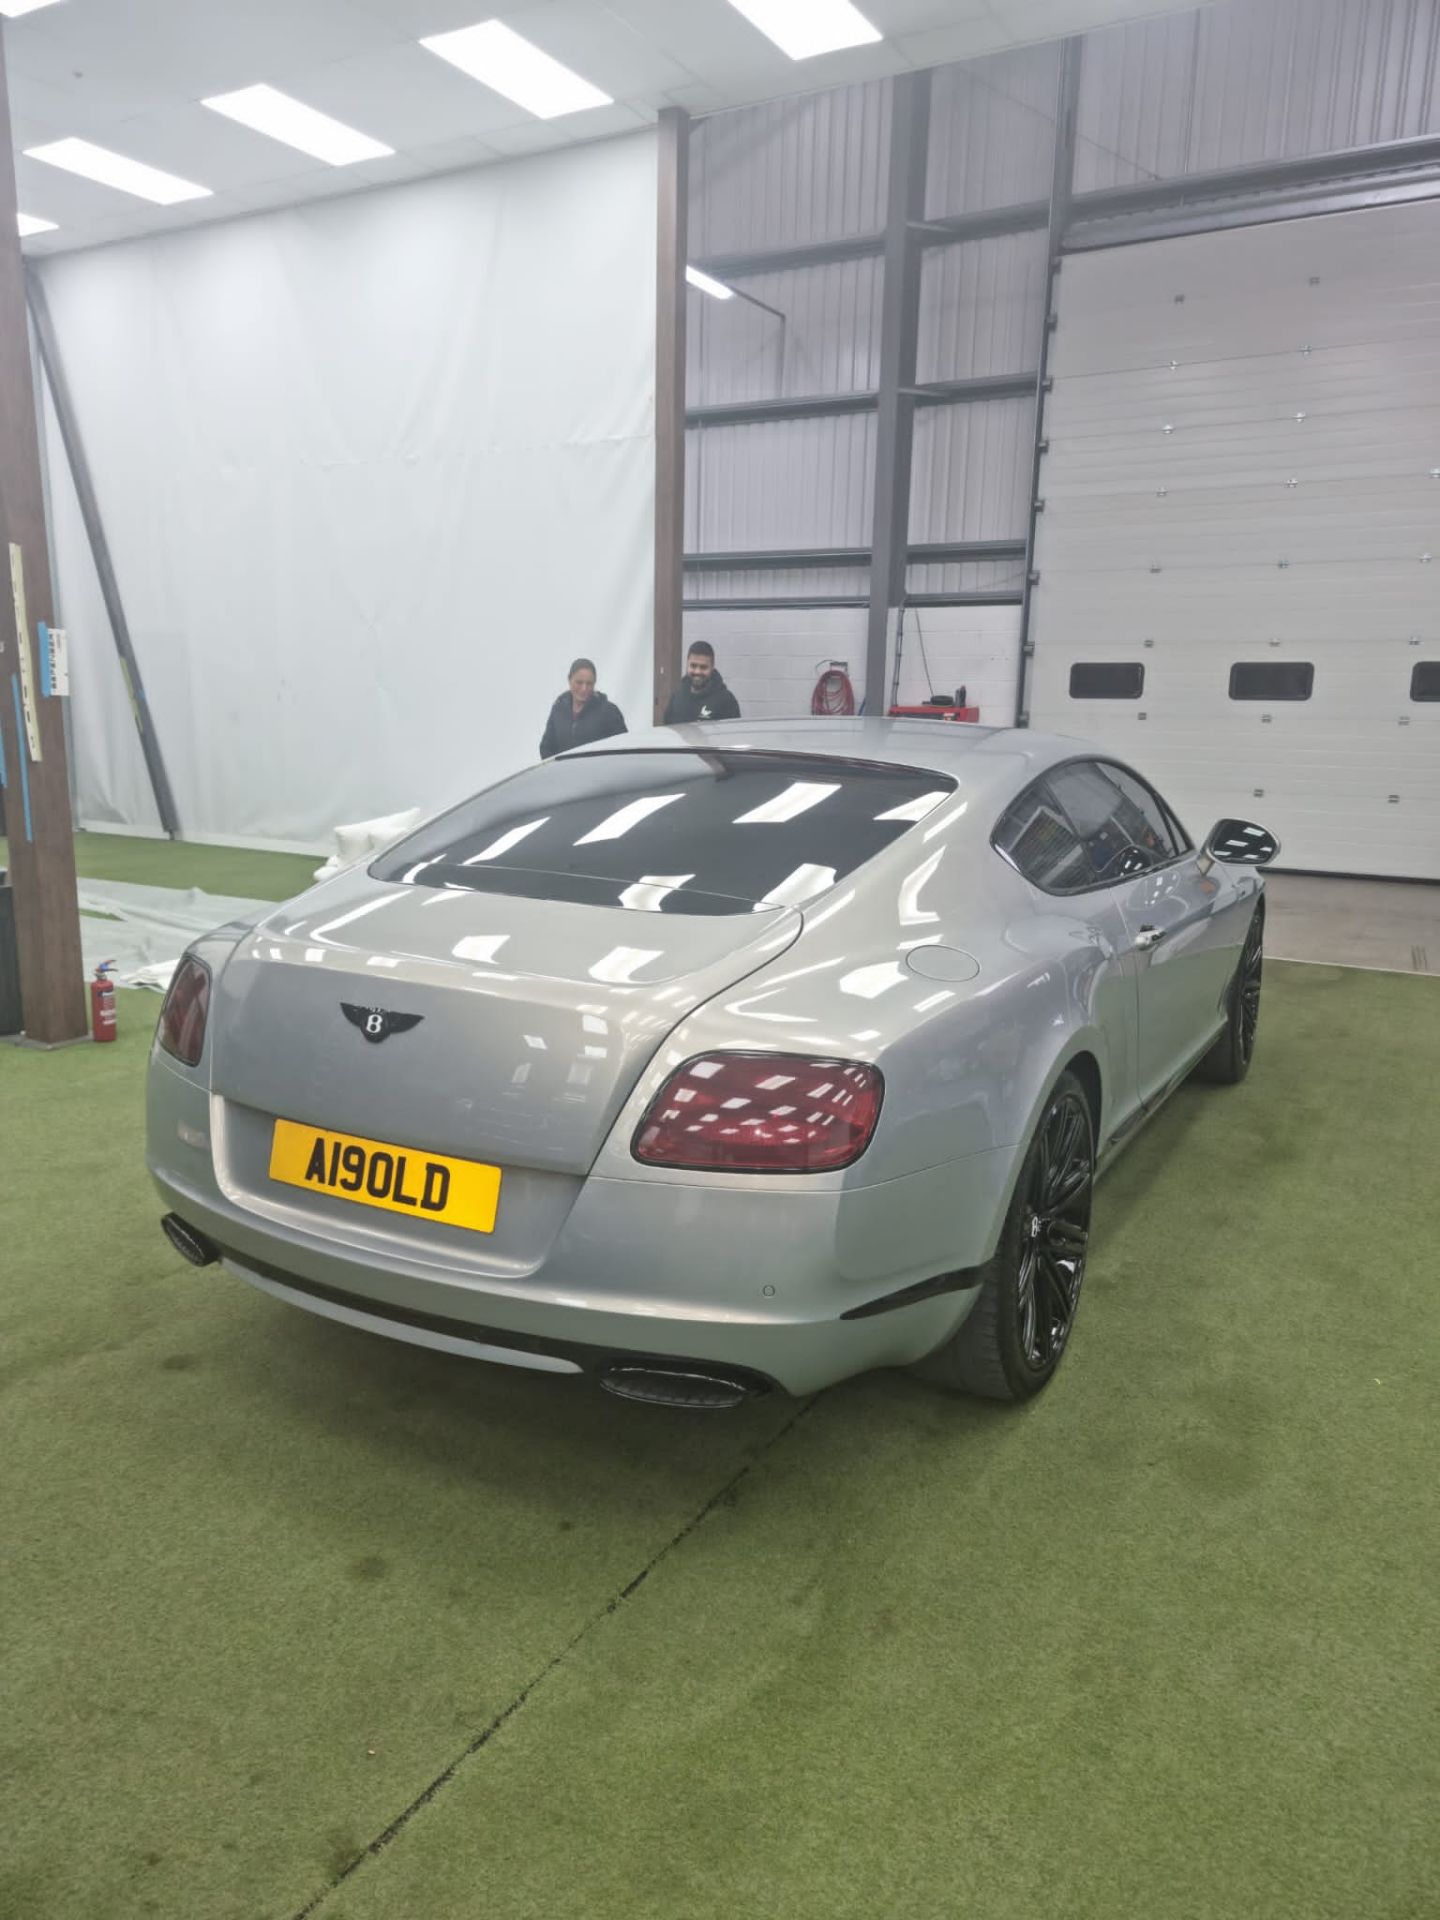 2013 BENTLEY CONTINENTAL GT SPEED AUTO GREY COUPE, 56k miles, 626 BHP, 5998 cc PETROL - Image 6 of 16